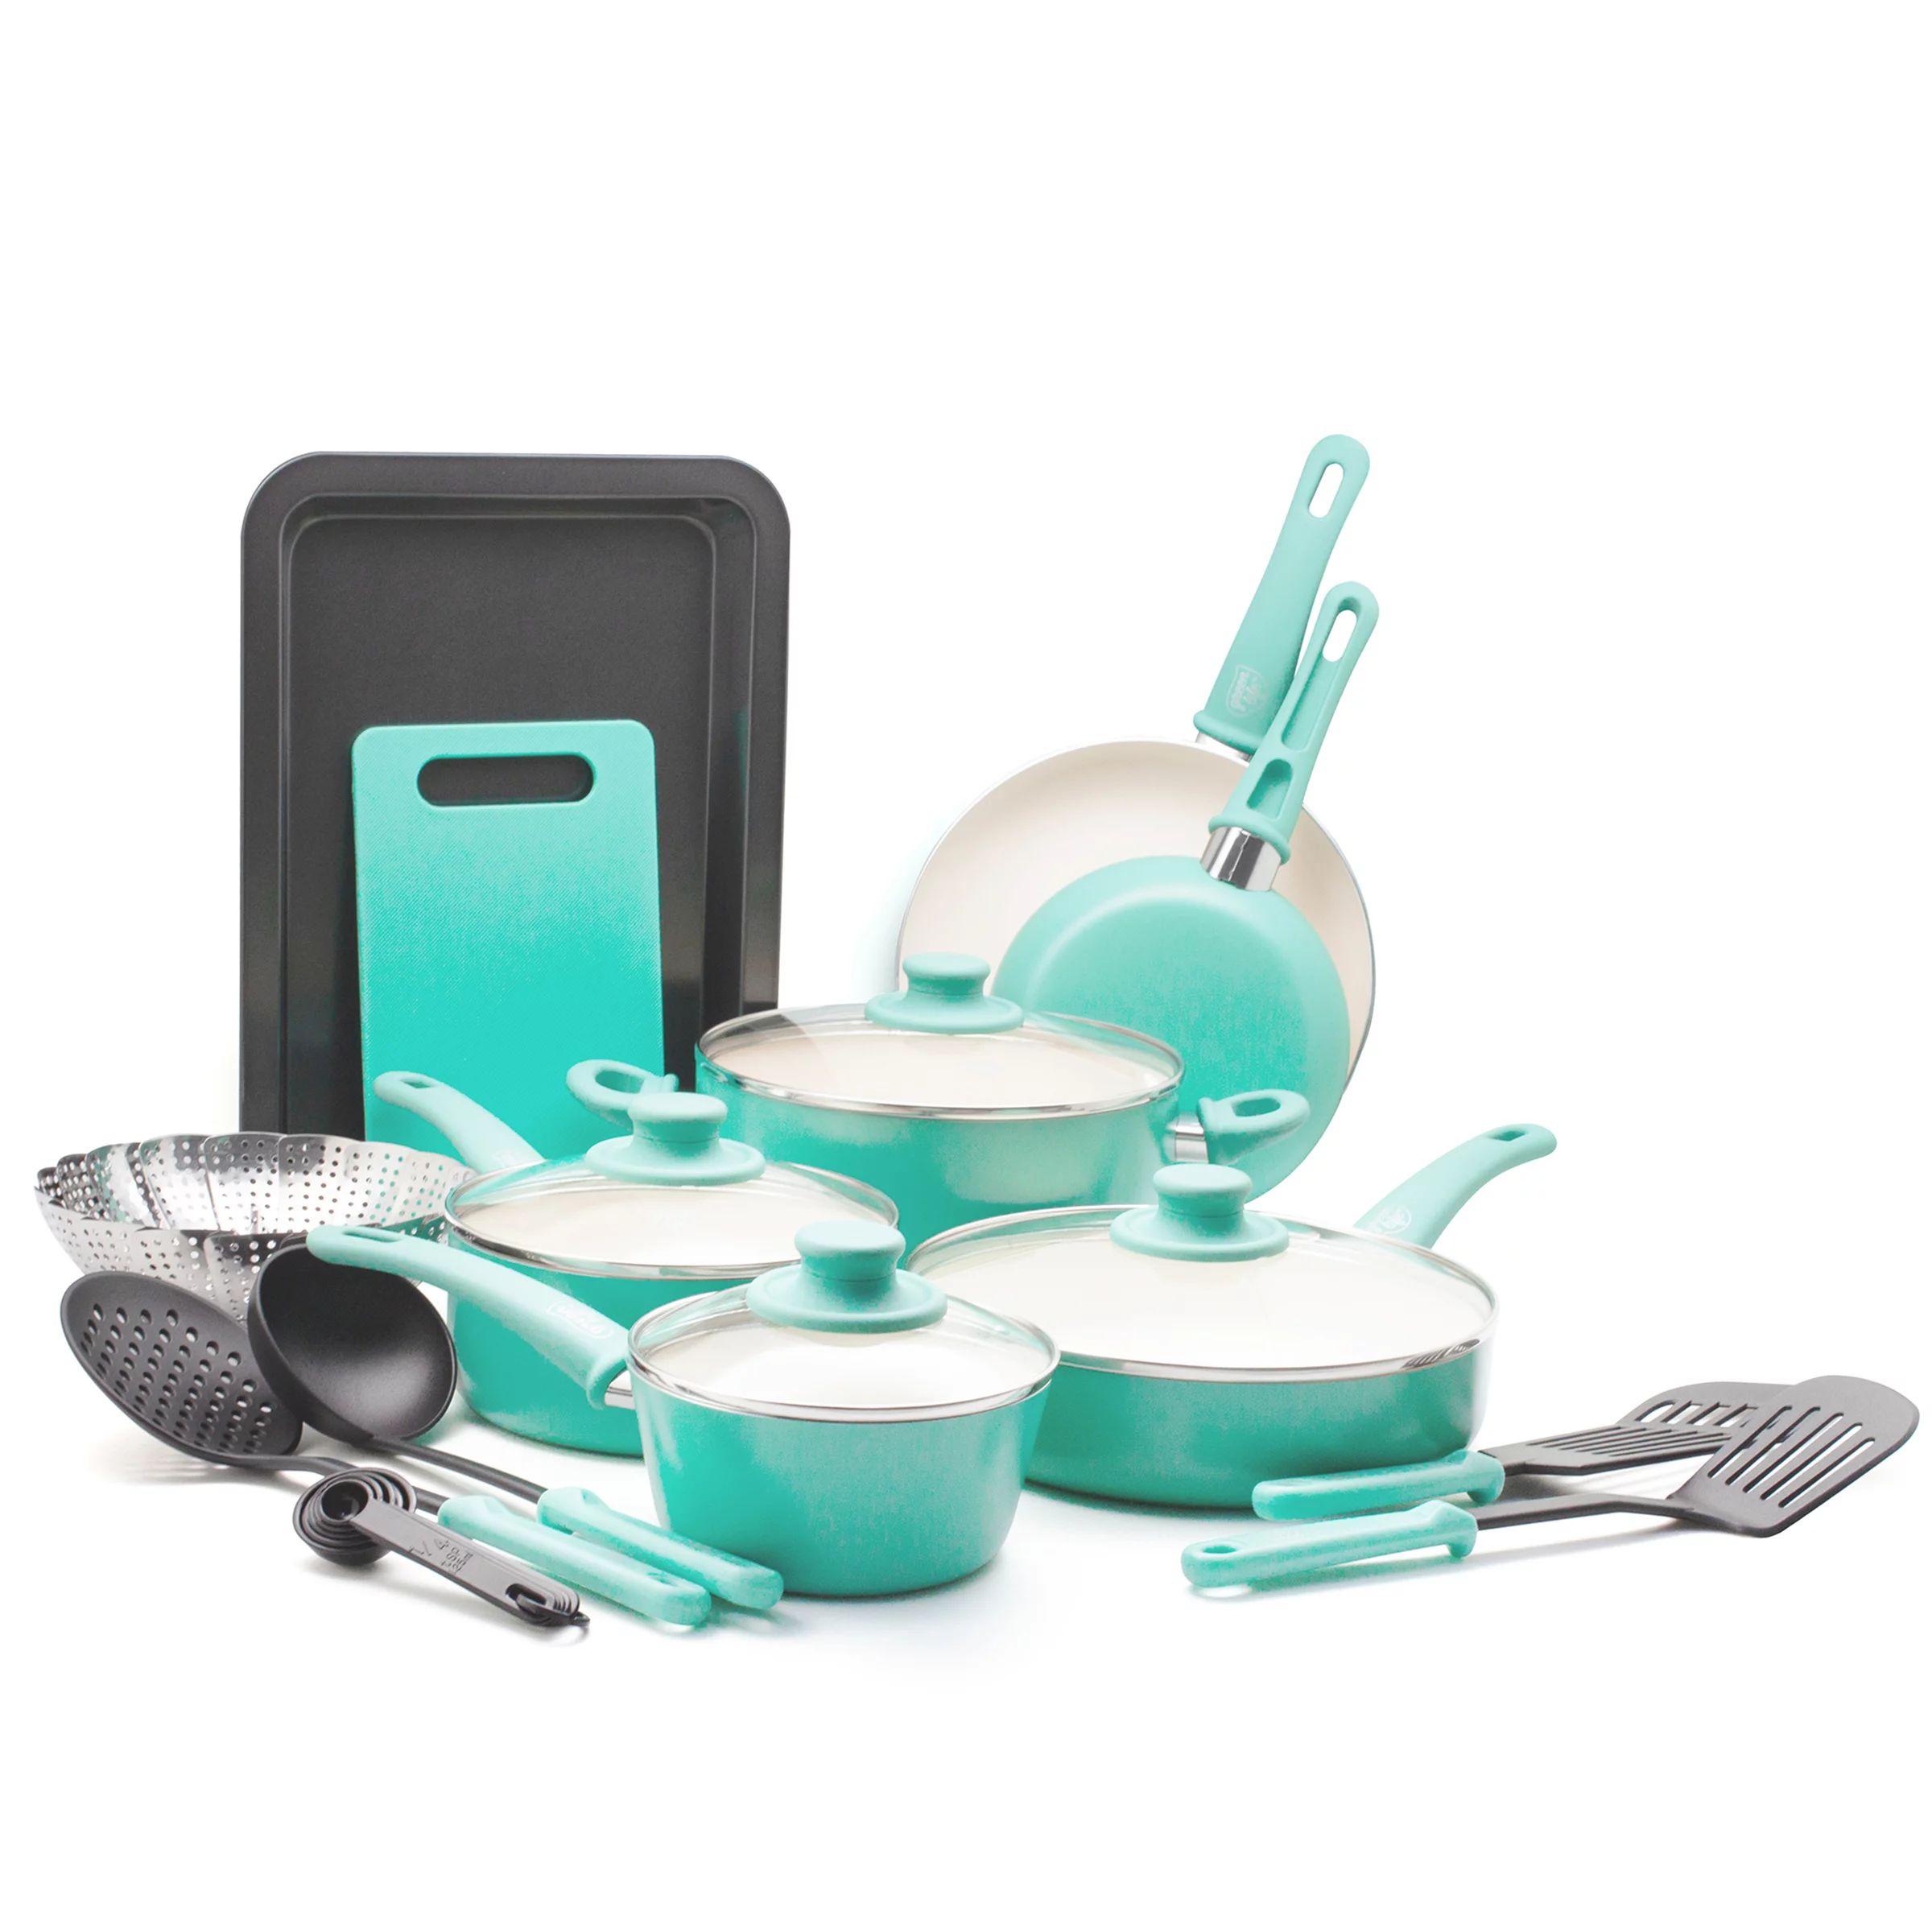 GreenLife Soft Grip Toxin-Free Healthy Ceramic Non-stick Cookware Set, 18 Piece, Turquoise | Walmart (US)